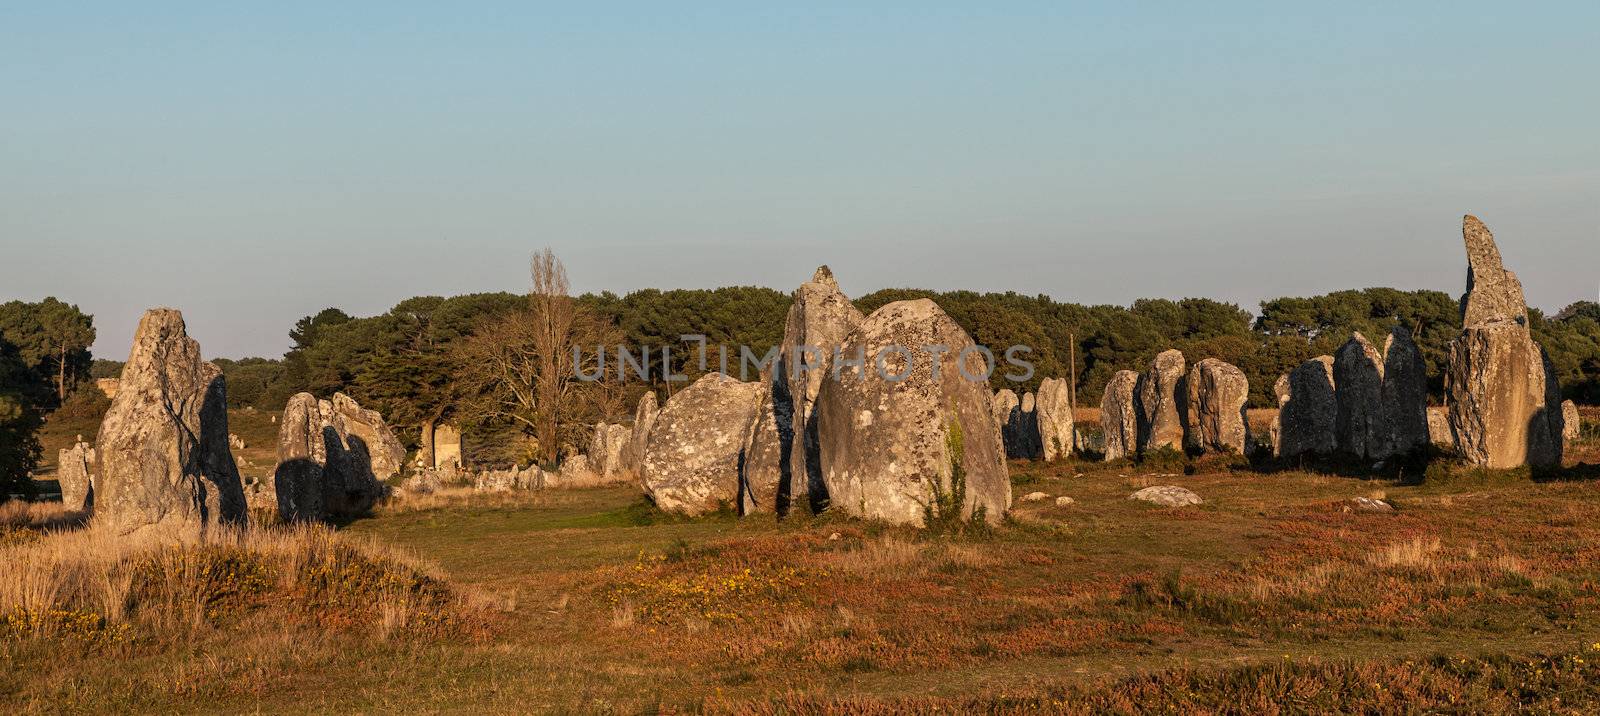 Image at the dusk of megalithic monuments menhirs in Carnac , Brittany in nortwest of France. This formation is a part of Menec Alignments.